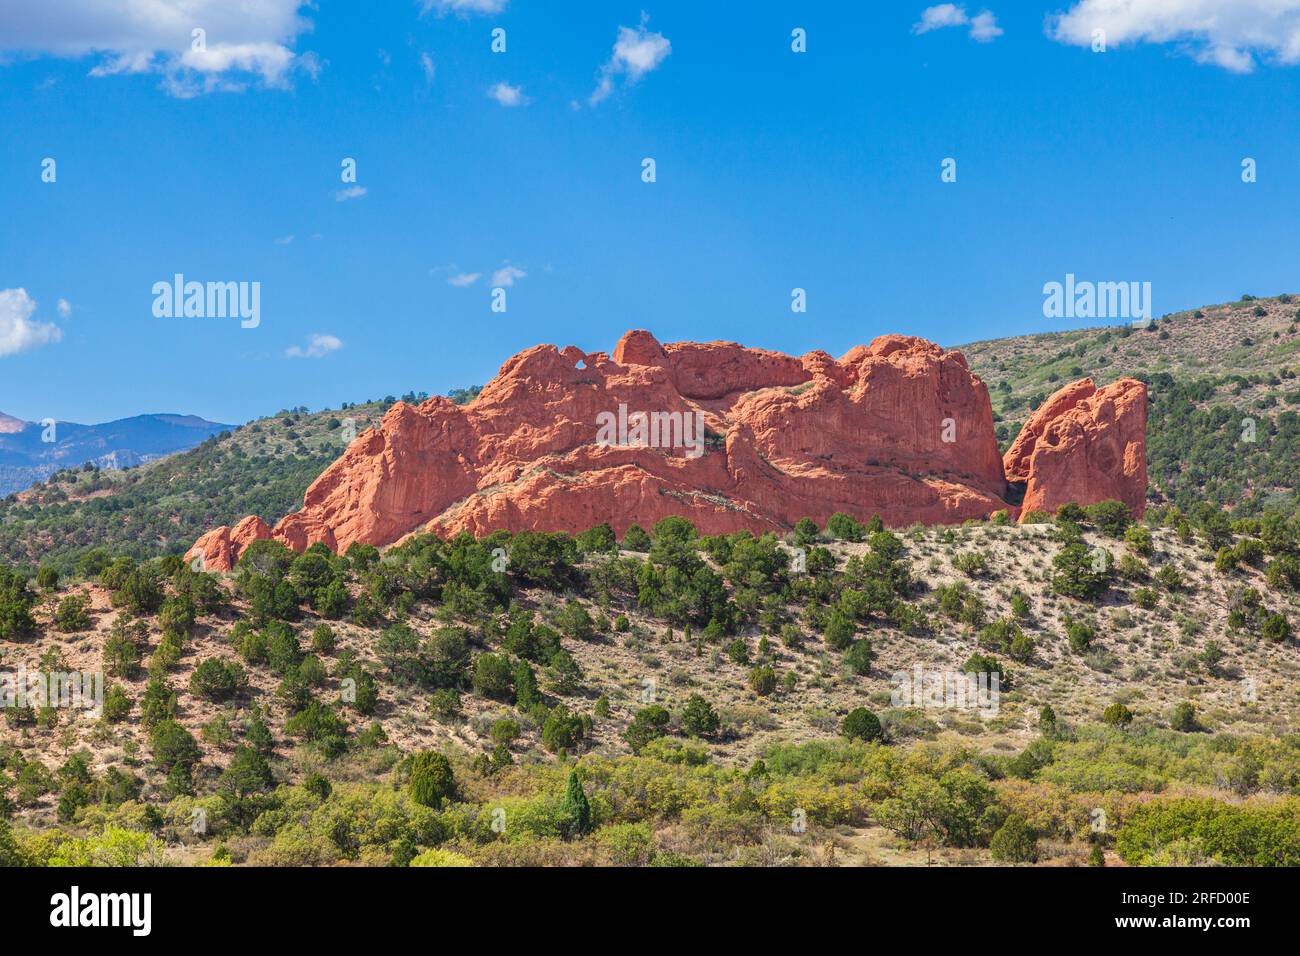 Garden of The Gods free public park at Colorado Springs, Colorado. This park has outstanding geological features and formations. Stock Photo